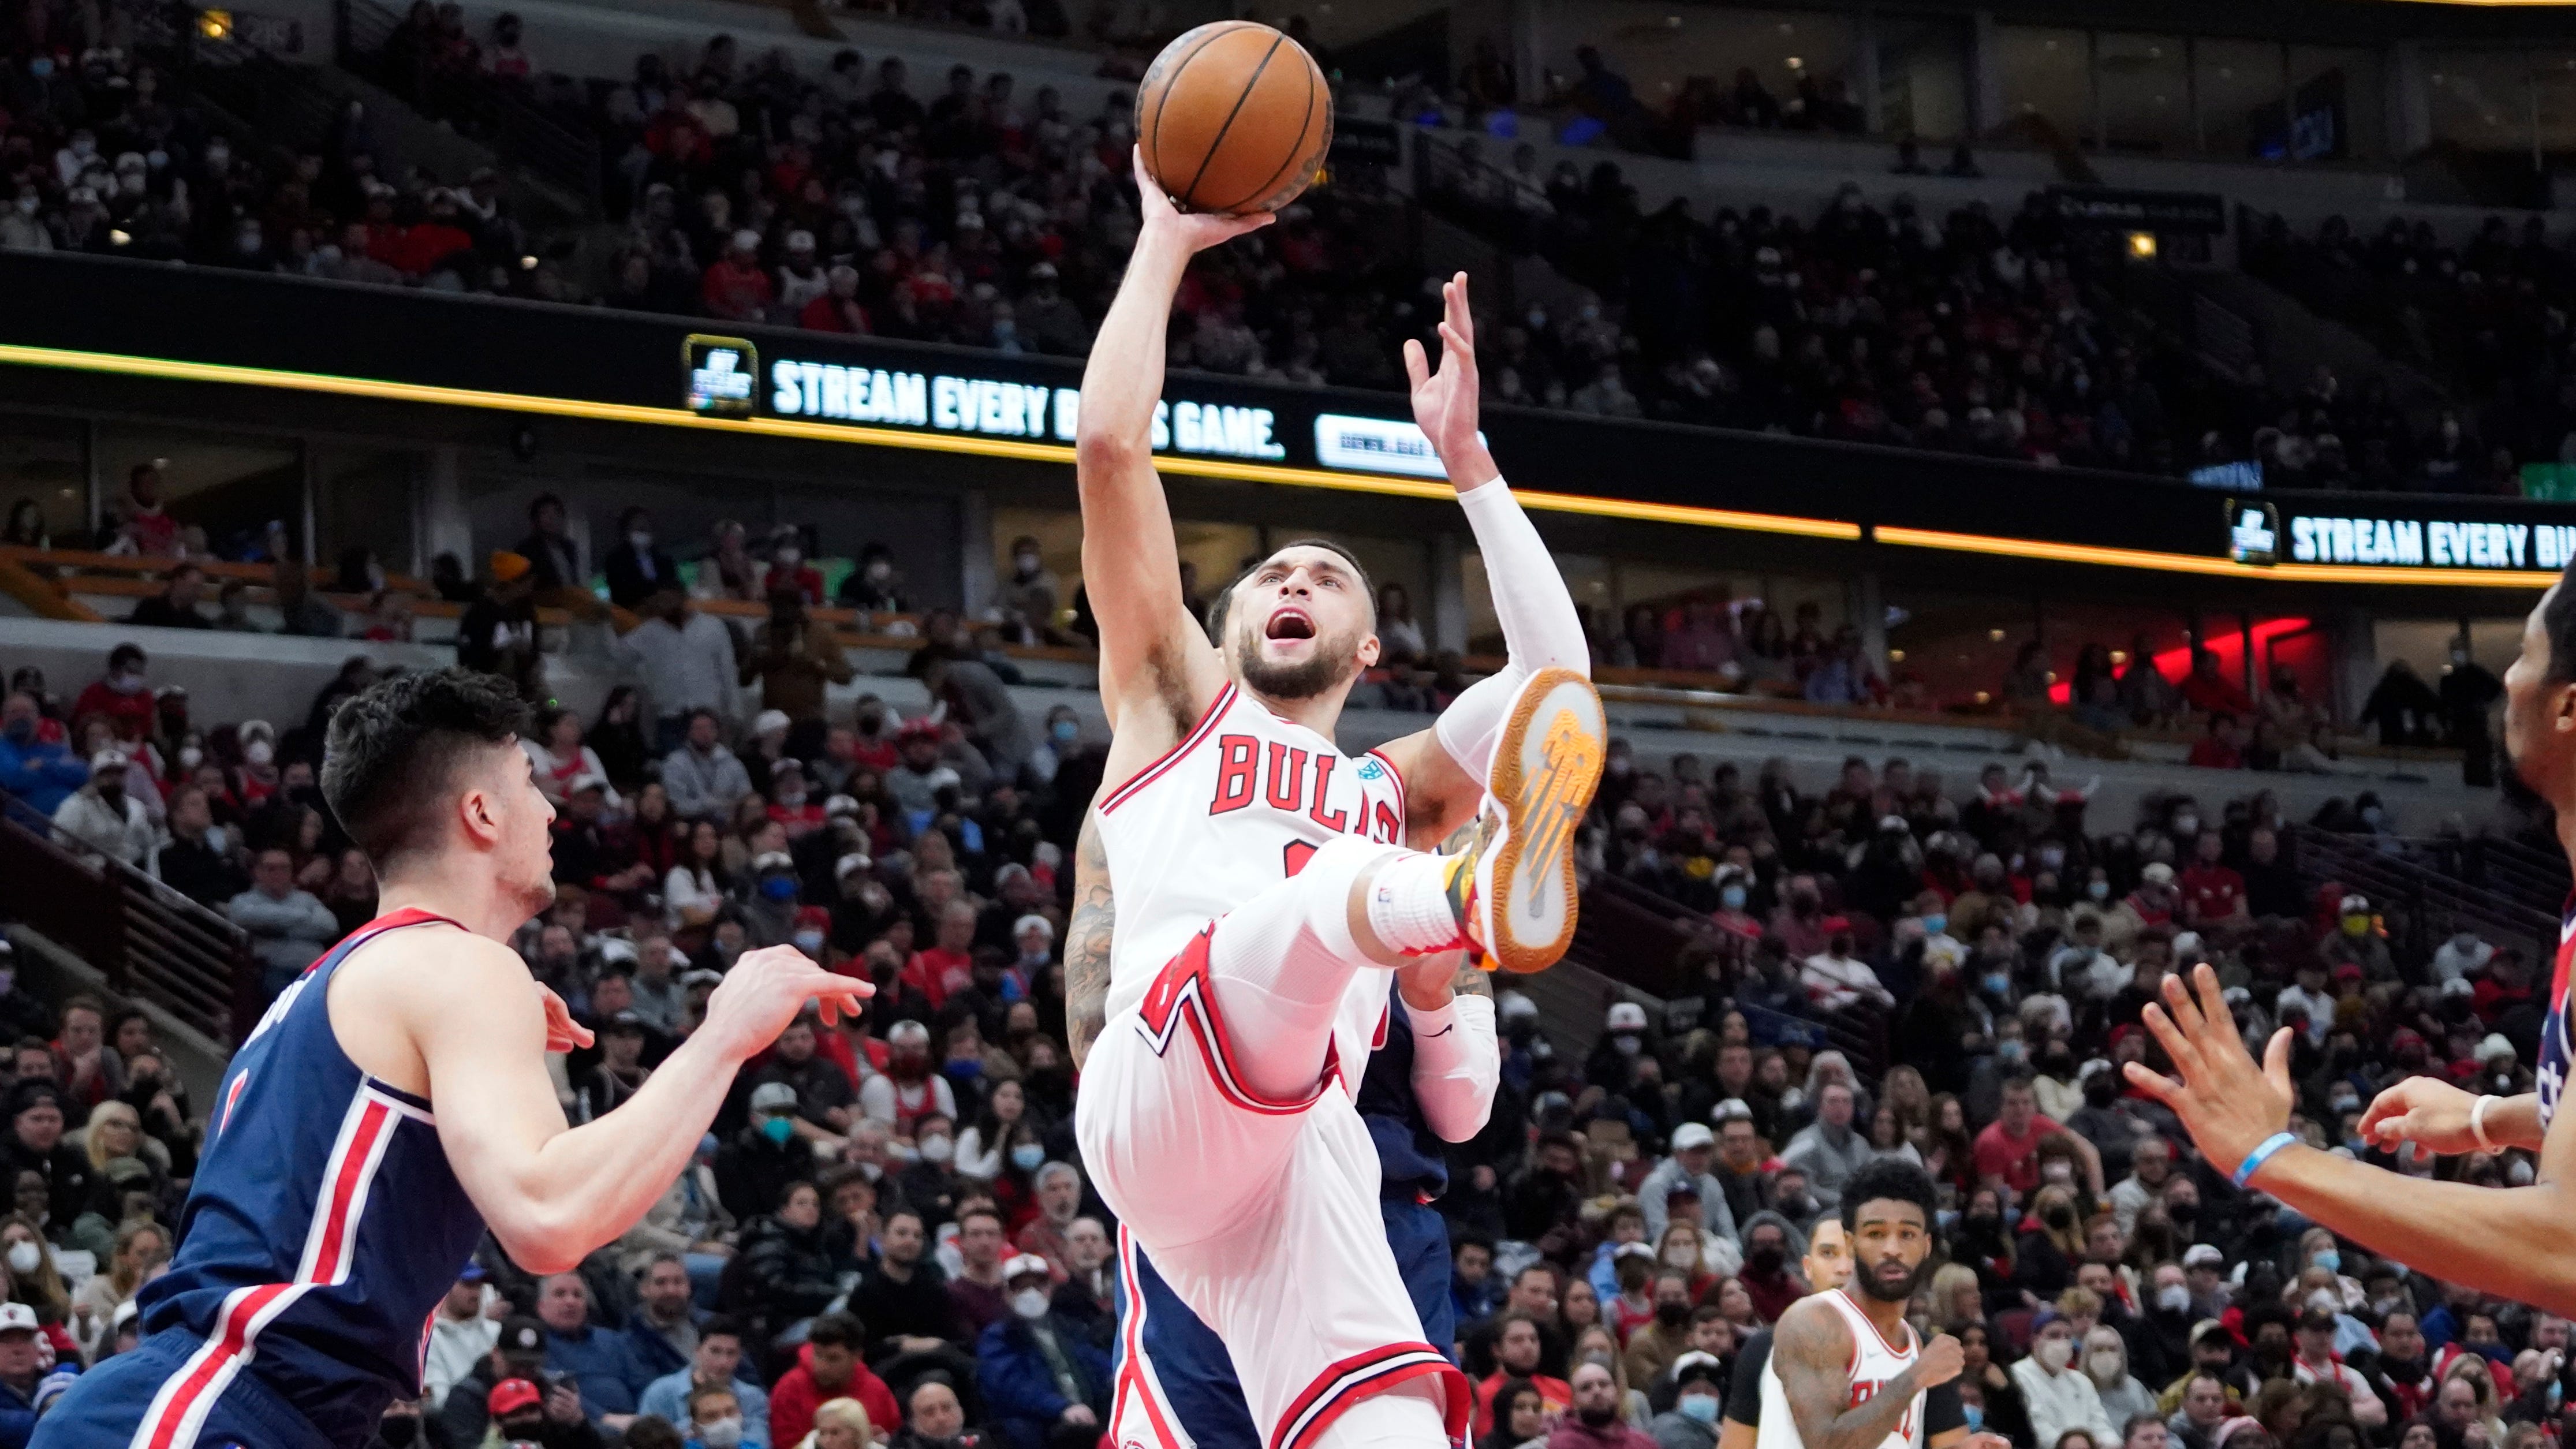 Jan. 7: Bulls guard Zach LaVine drives and puts up the off-balance shot in the lane against the Wizards.